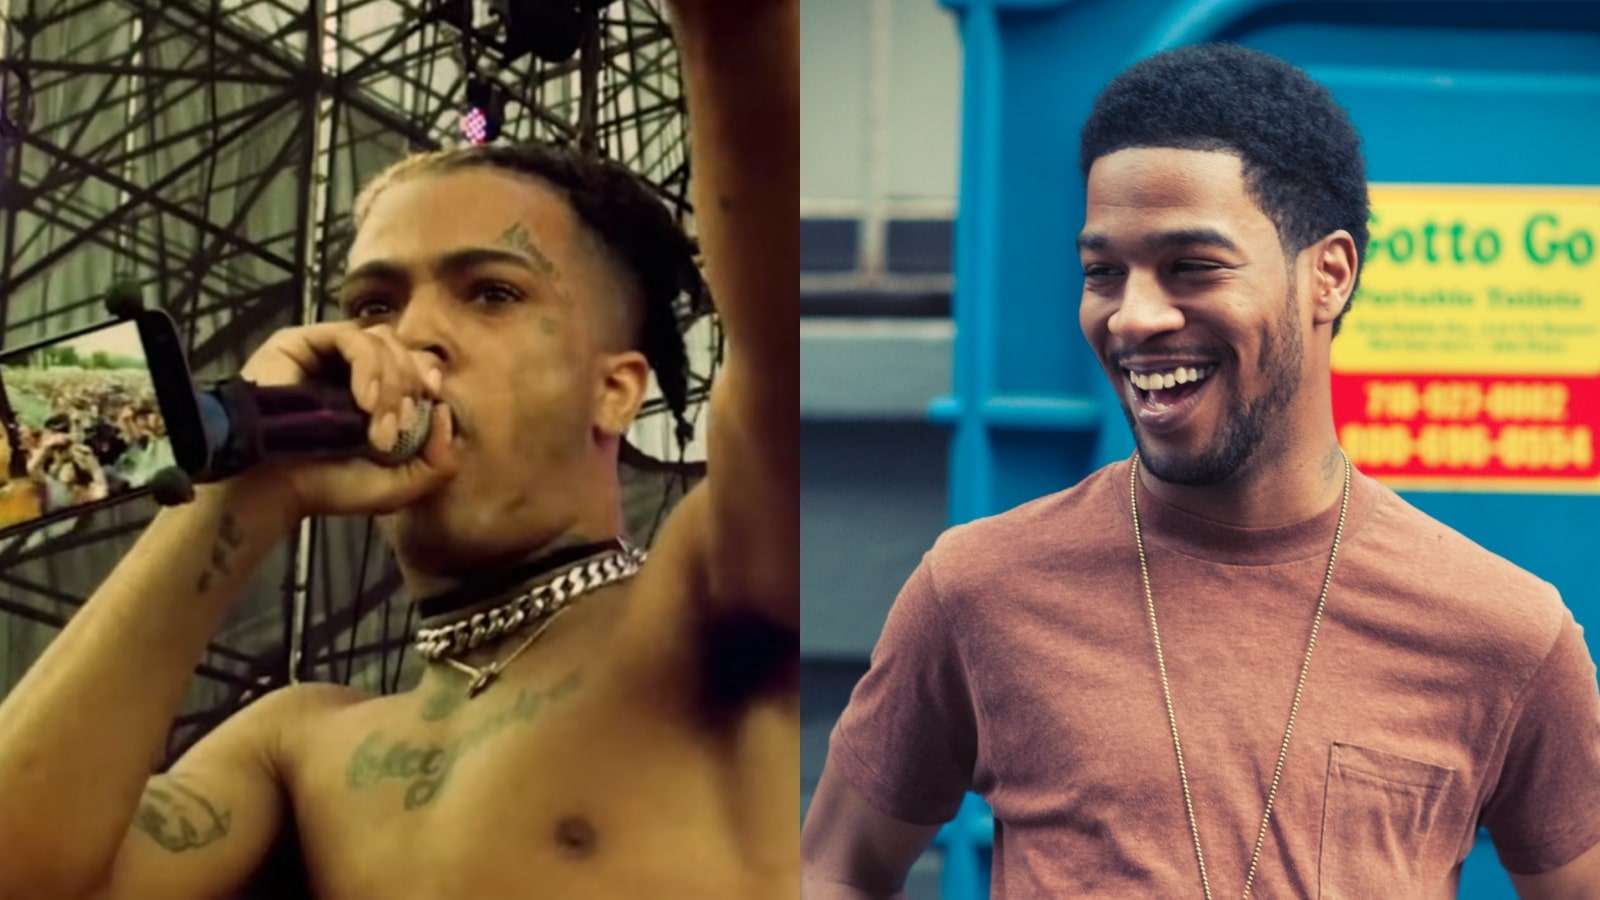 XXXTentacion and Kid Cudi in side-by-side photos